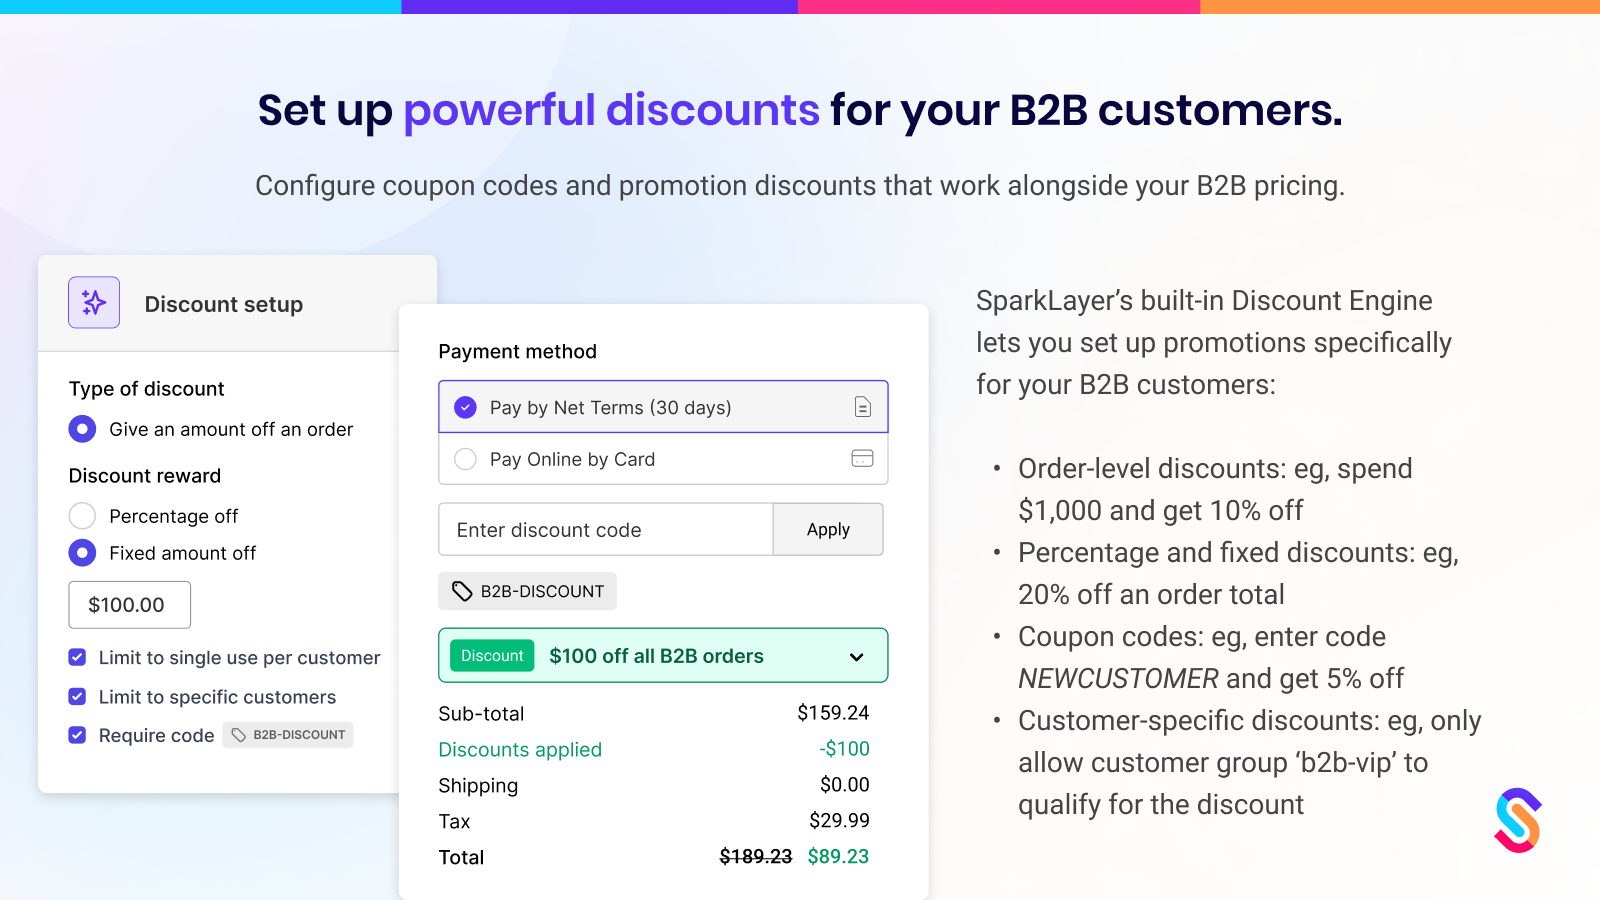 Set up powerful discounts for your B2B customers.